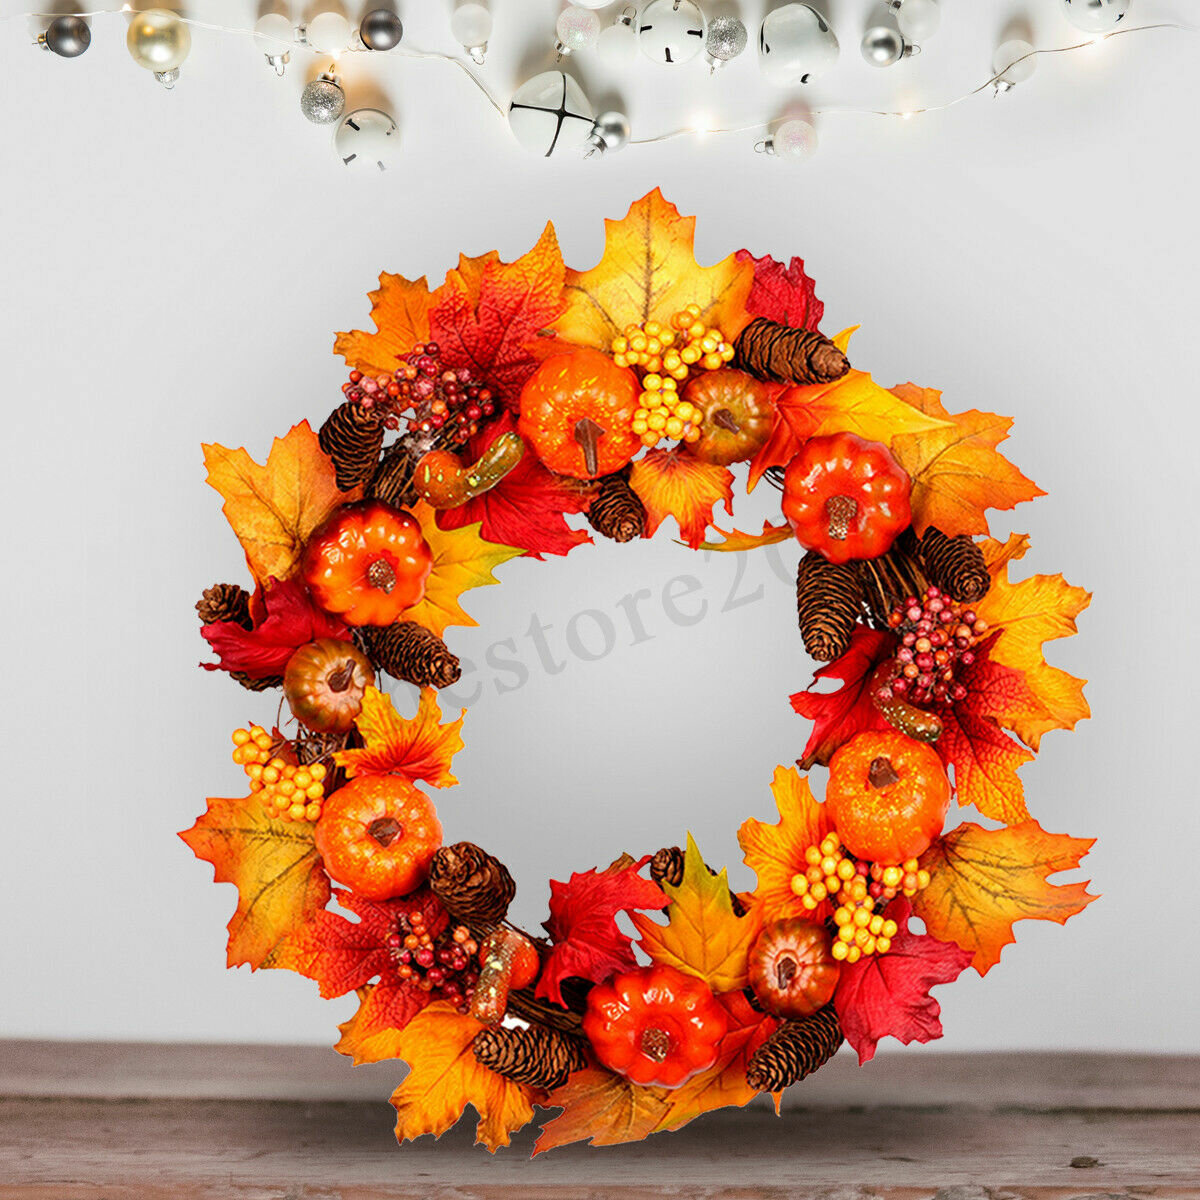 45/60cm Wreath Garland Maple Leaves Pumpkin Door For Christmas Party ...